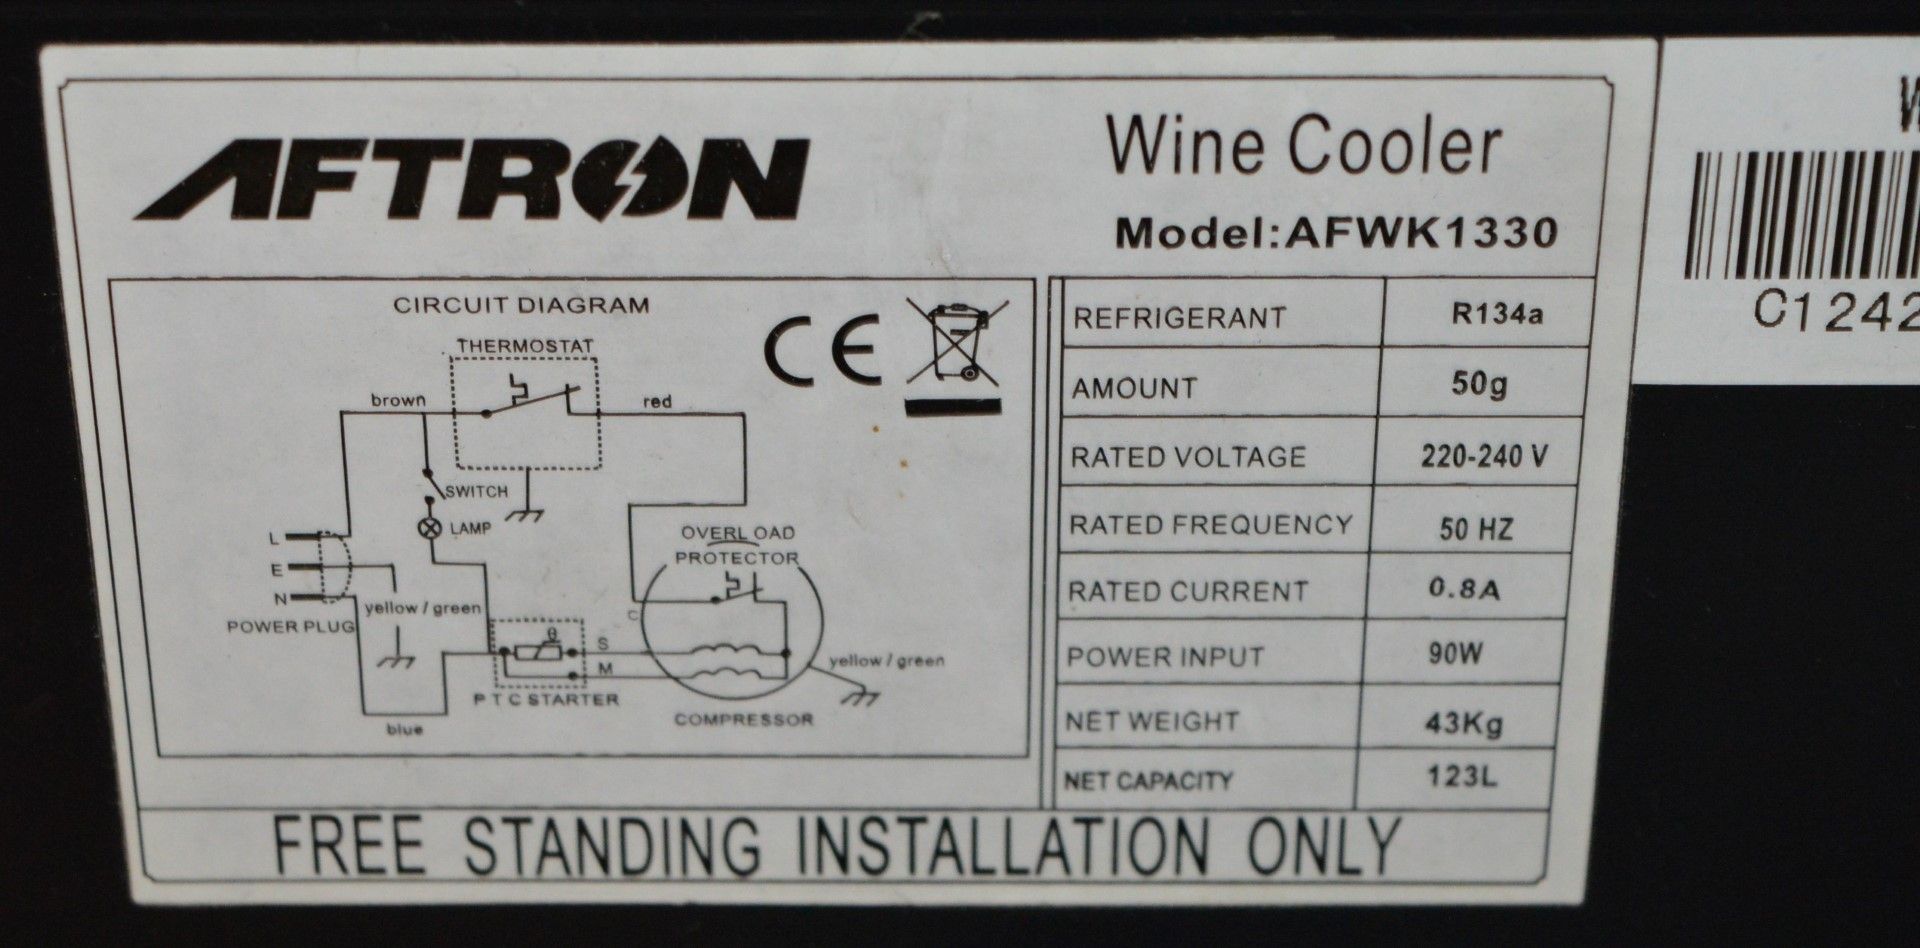 1 x Aftron Freestanding Wine Bottle Chiller - Model AFWK1330 - Ideal For Home Use or Commercial - Image 11 of 11